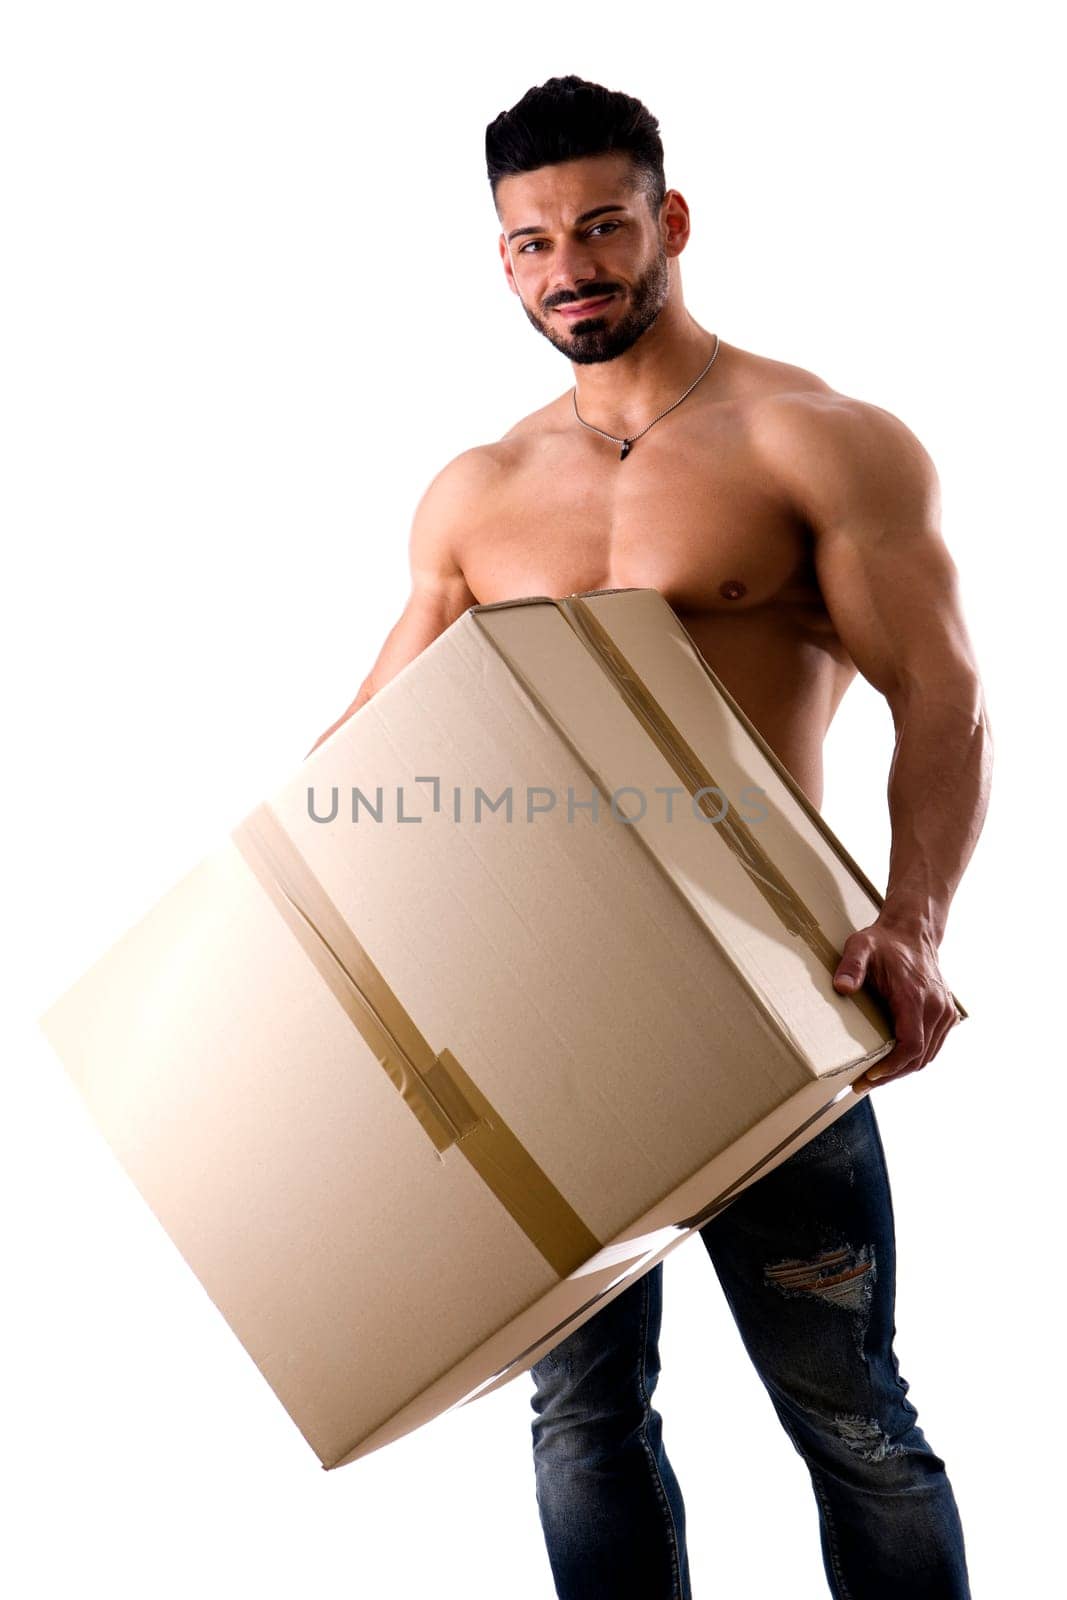 A shirtless man holding a large box with his strong muscular arms